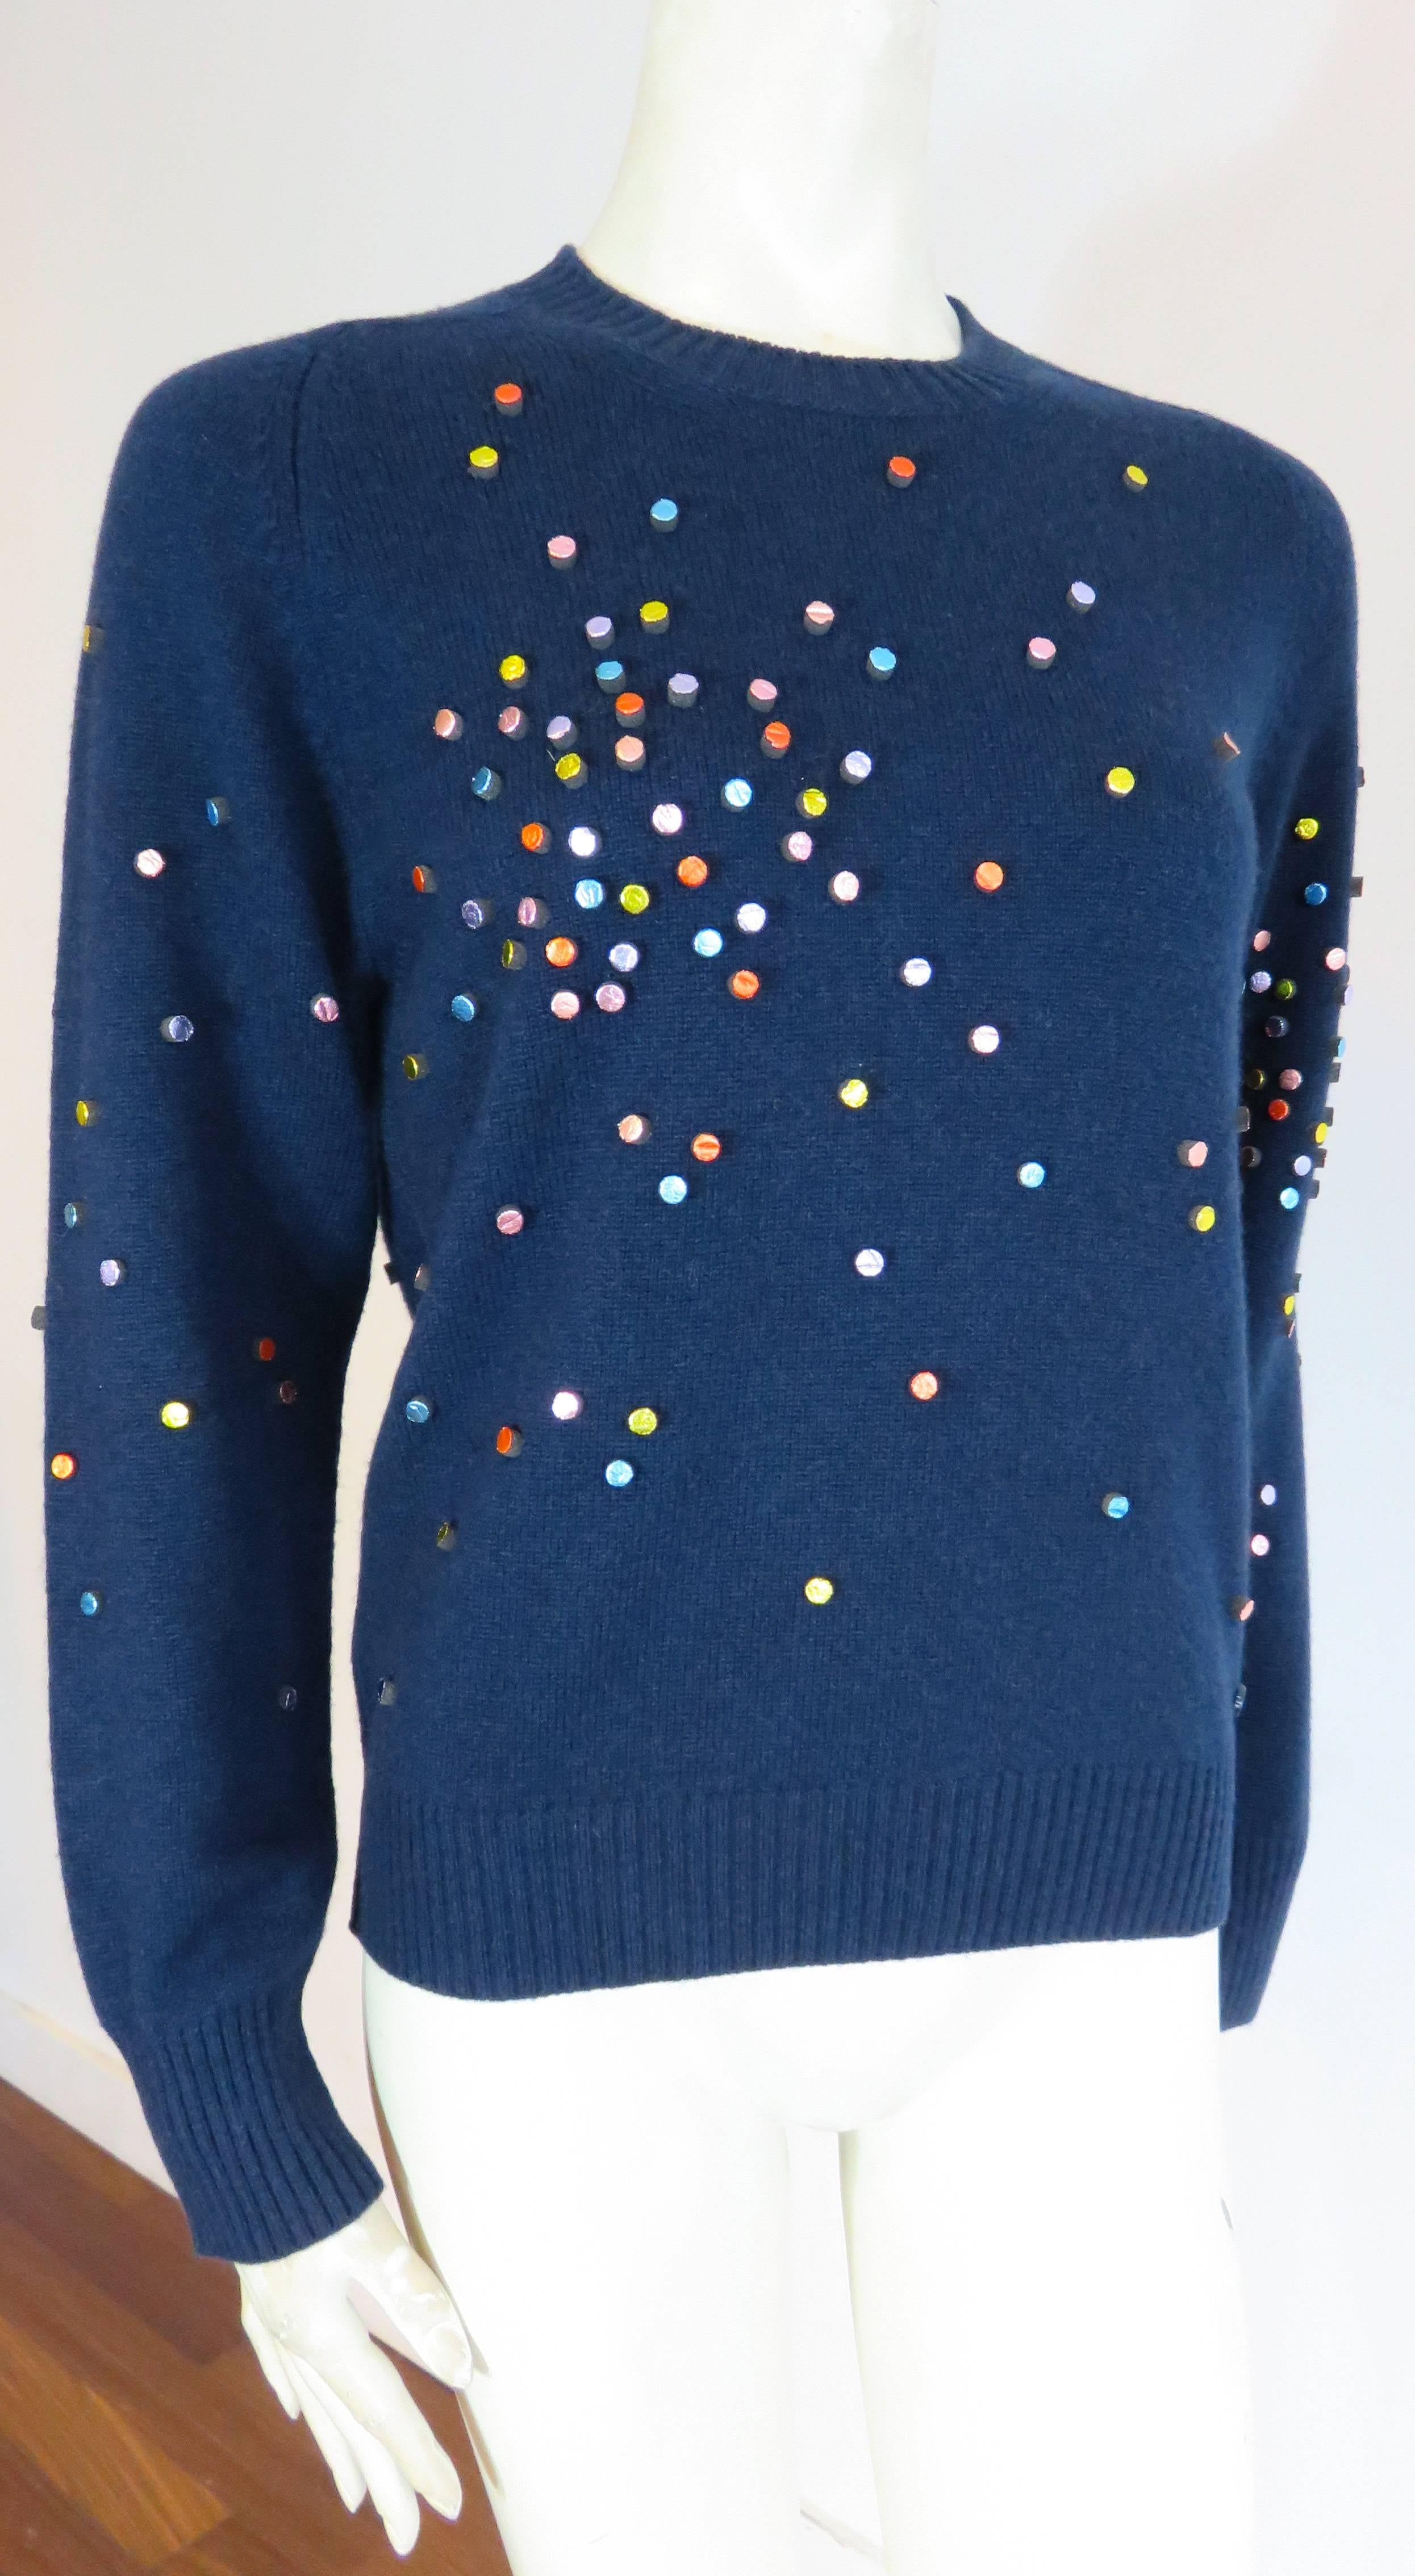 Excellent condition, CHANEL PARIS, 100% cashmere sweater with shimmering, multi-color, metallic foil covered, circle embellishments.

From the Fall 2014, 'SuperMarket / Un Grand Magasin' collection.

Luxuriously soft cashmere